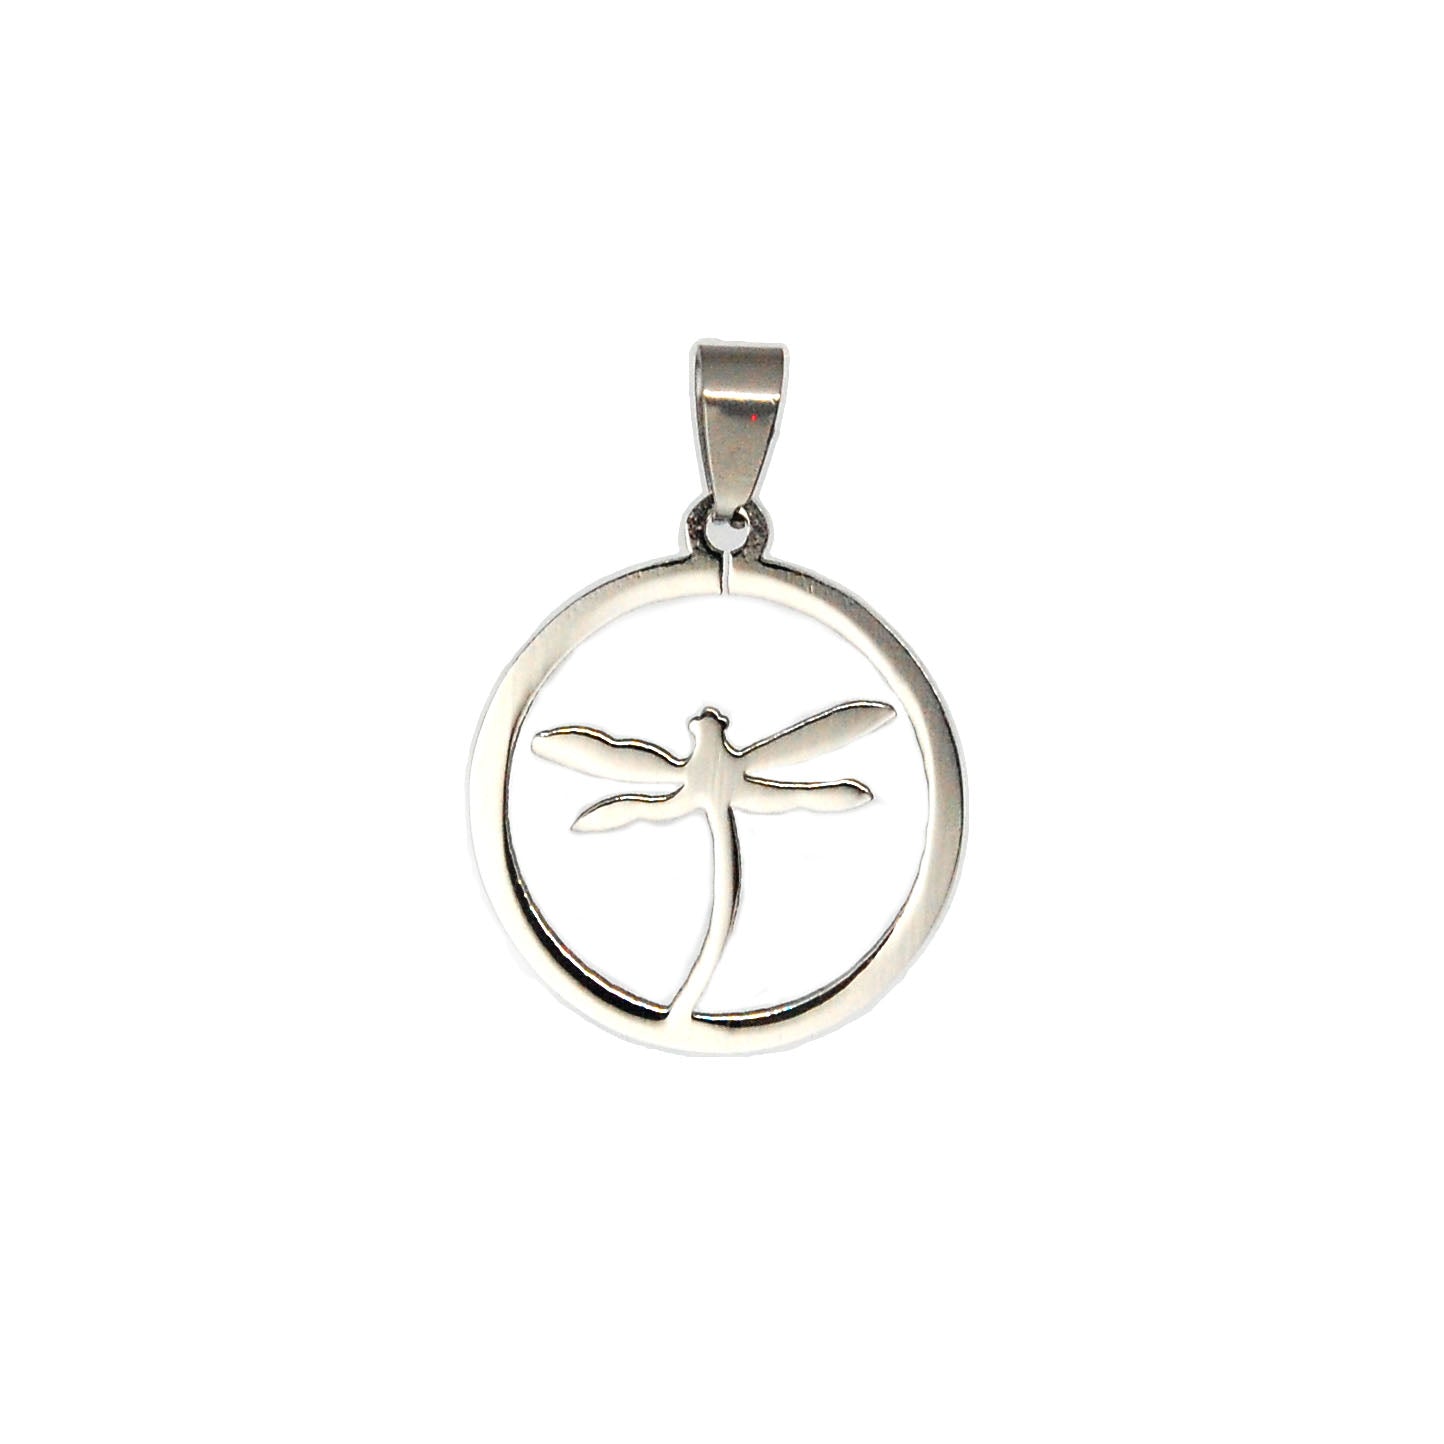 ESP 5059: Firefly in a Circle Pendant